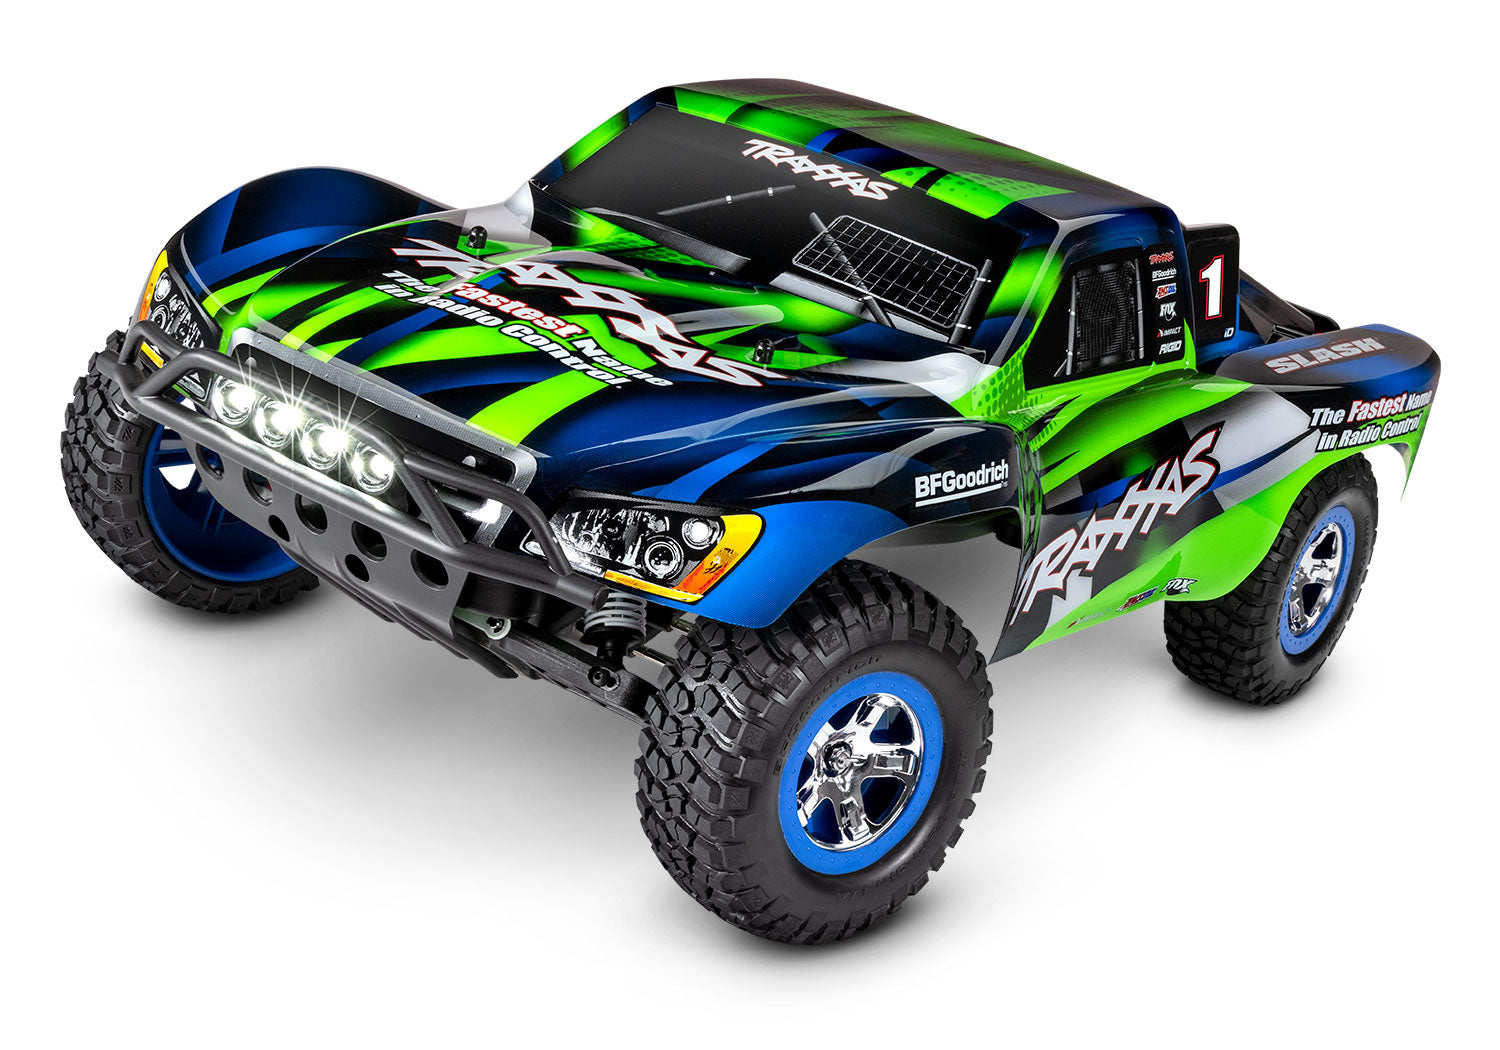 TRAXXAS 58034-61 Slash 1/10 scale waterproof 2WD short course truck. RTR, with TQ™ 2.4GHz radio system, XL-5® Electronic Speed Control, 8.4V NiMH 3000mAh battery, 4-amp DC Charger, LED lighting, and painted body.